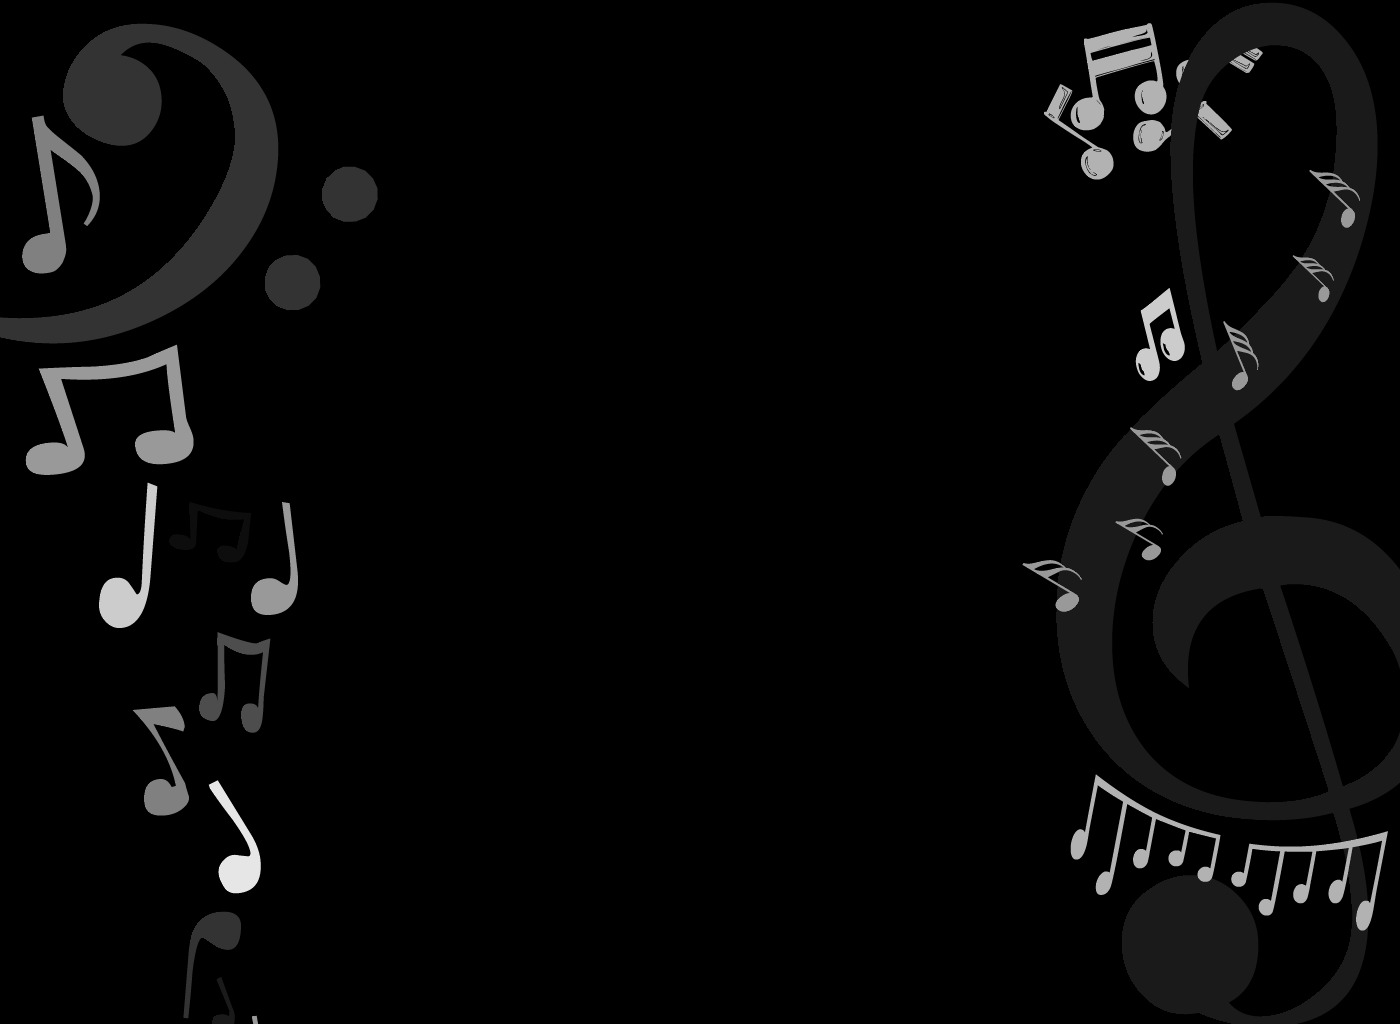 Black and white music notes wallpaper